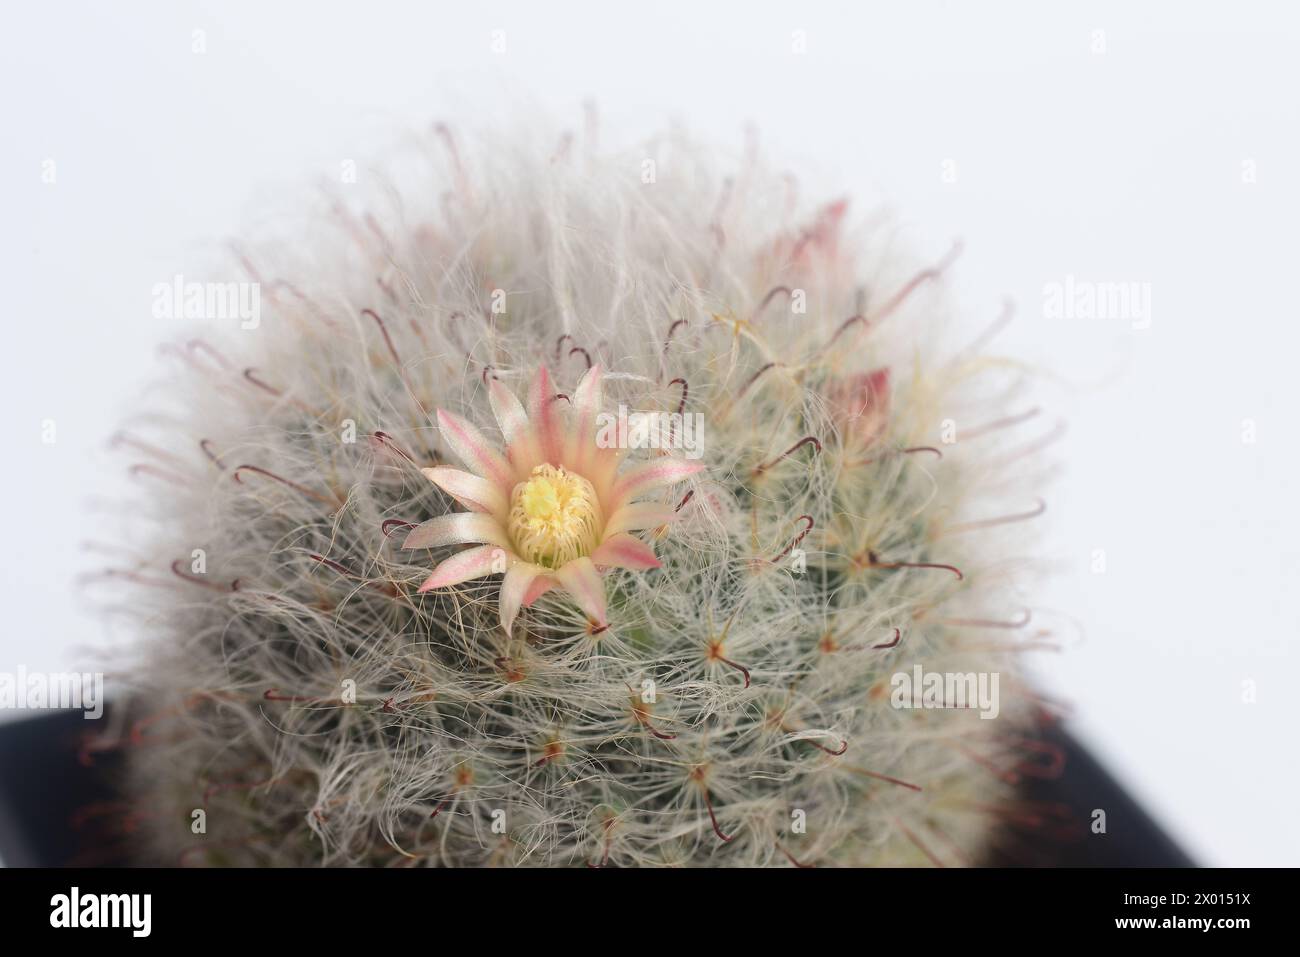 Mammillaria bocasana cv. multilanata is a selected cultivars densely covered by white woolly hairs similar to Mammillaria bocasana cv. It is commonly Stock Photo